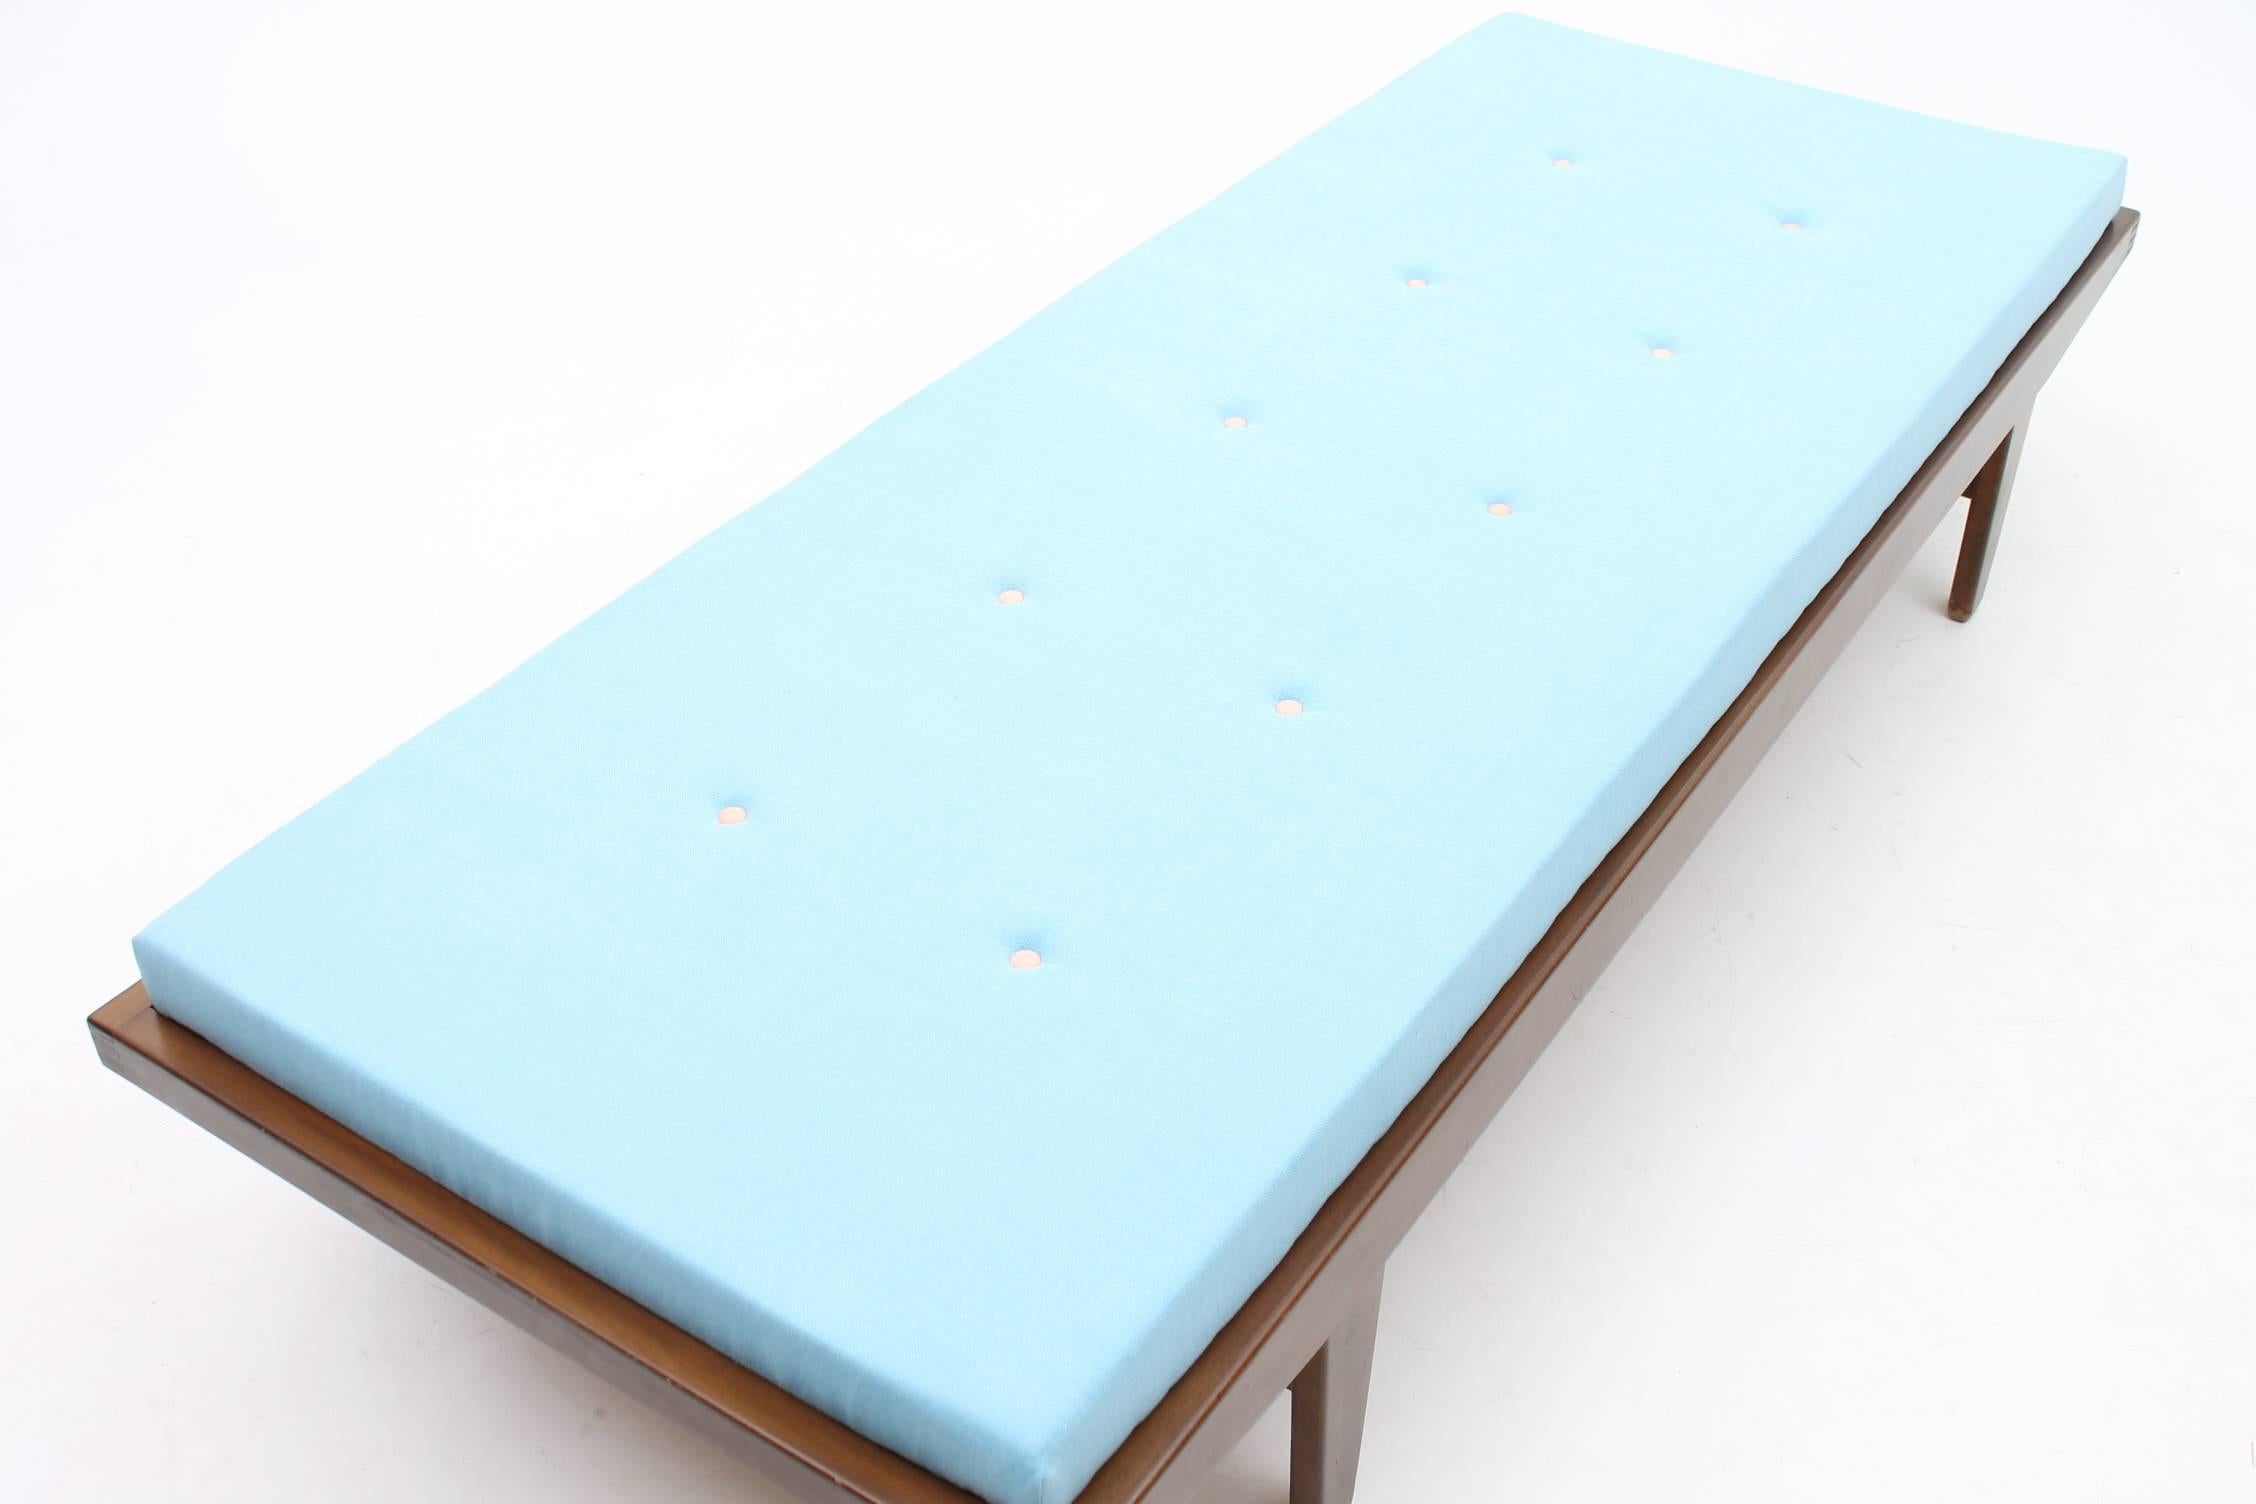 Beautiful daybed designed by Poul Volther for Illums Bolighus. The cushion is has brand new foam and new light blue upholstery with natural leather buttons. The oak frame is sleek and contrasts with the bright foam cushion. The daybed is in